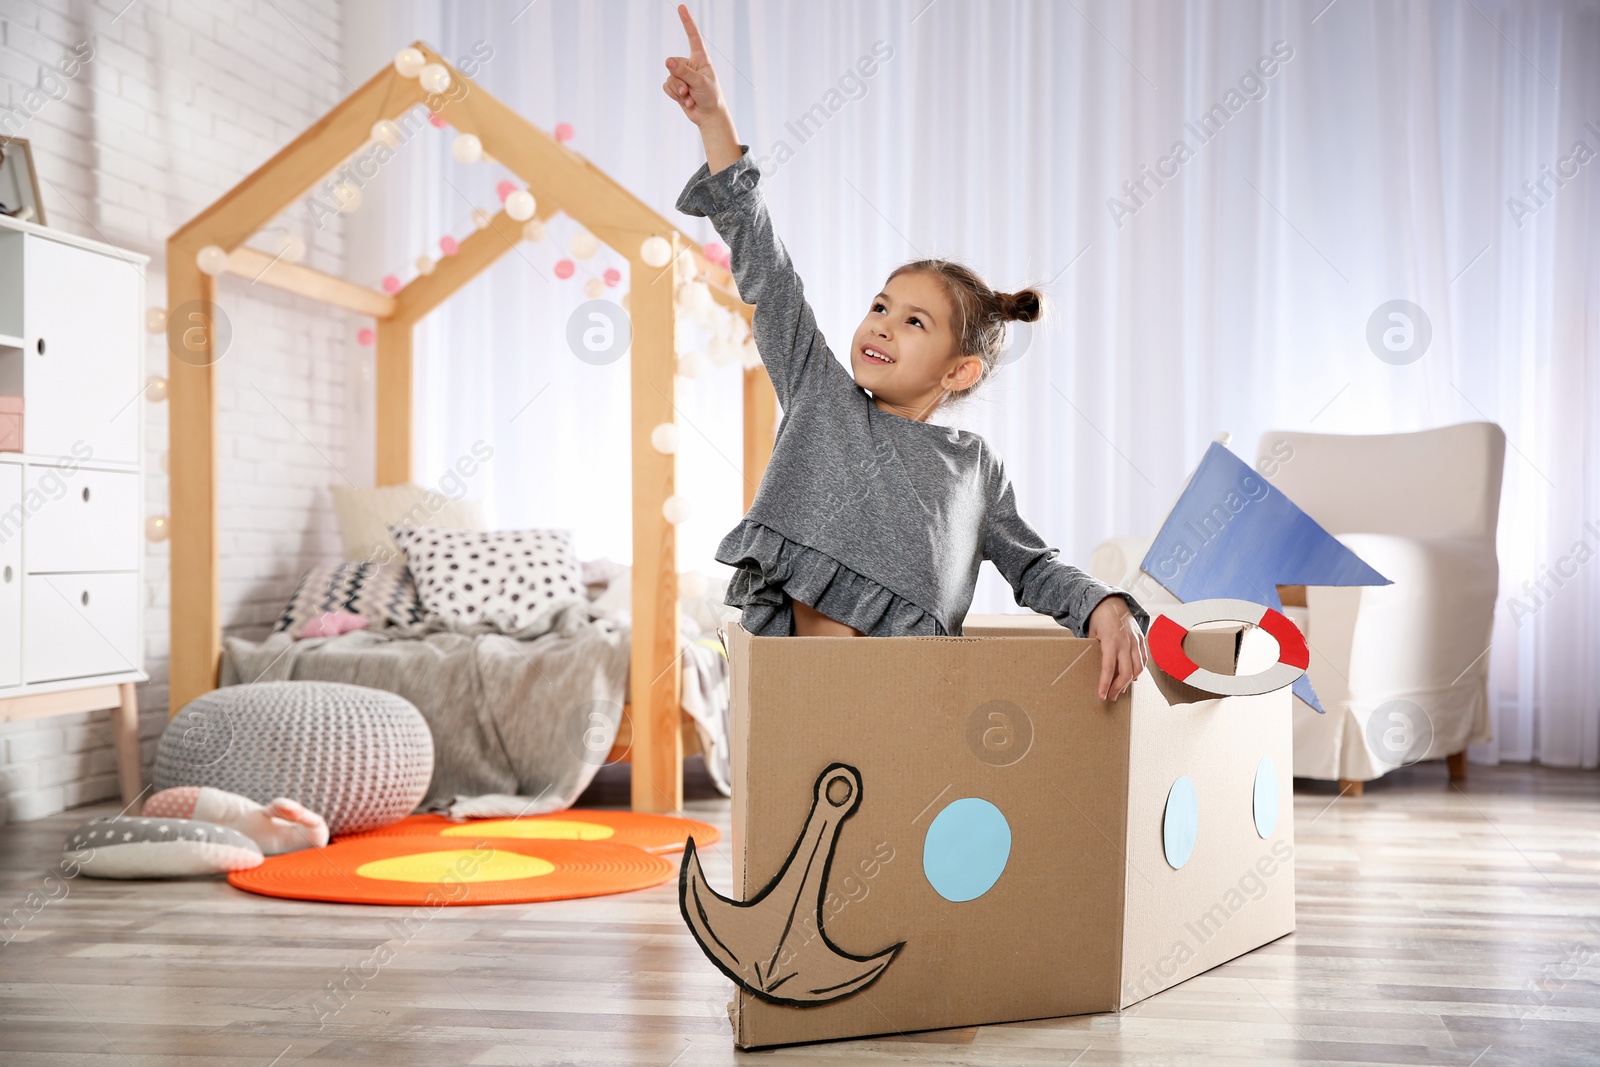 Photo of Cute little girl playing with cardboard boat in bedroom